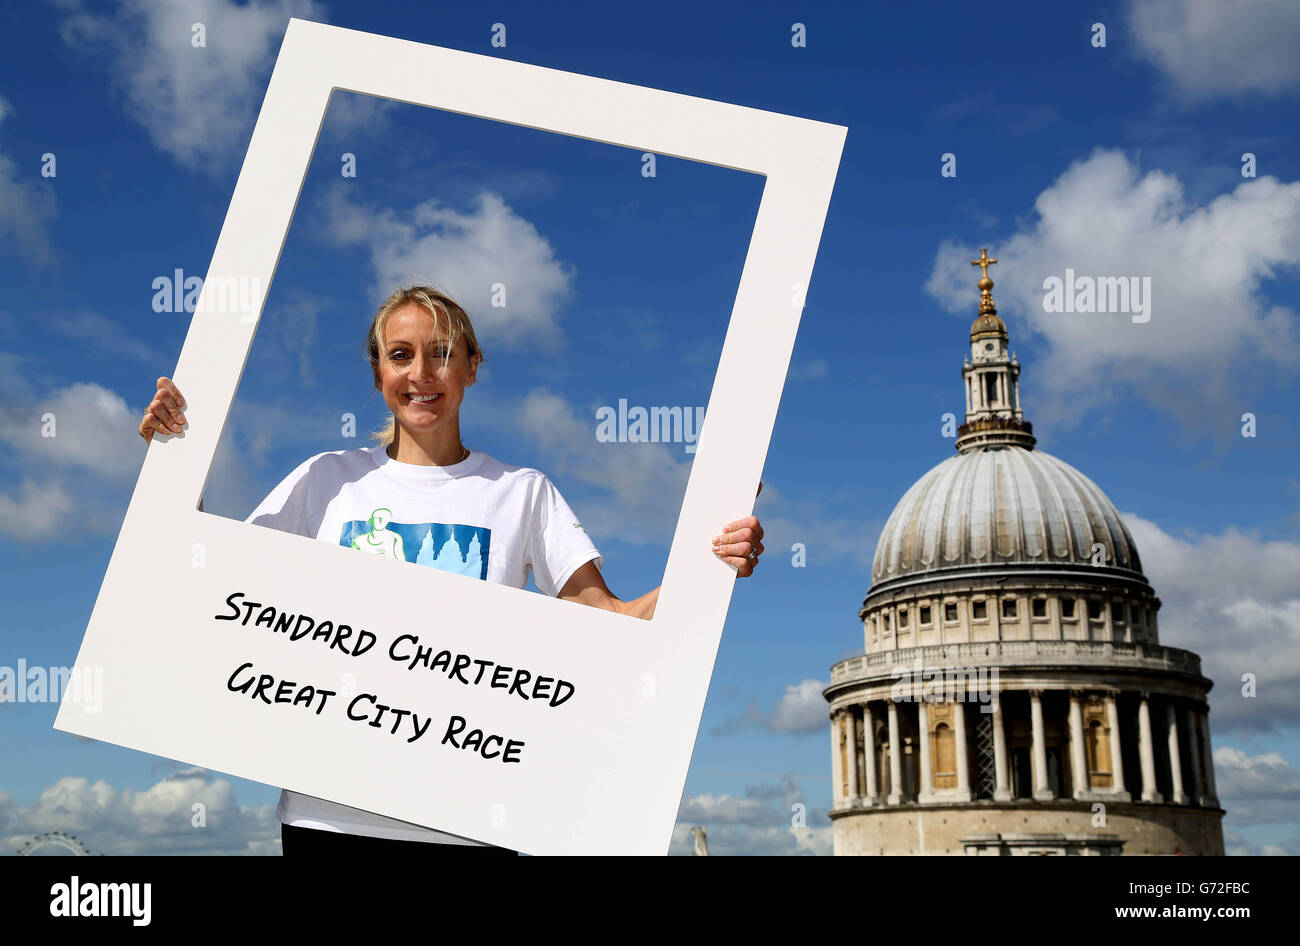 EDITORIAL USE ONLY Paula Radcliffe, who is one of this year's 10th anniversary Standard Chartered Great City Race ambassadors, on the Rooftop Terrace during the race launch at One New Change in London. Stock Photo